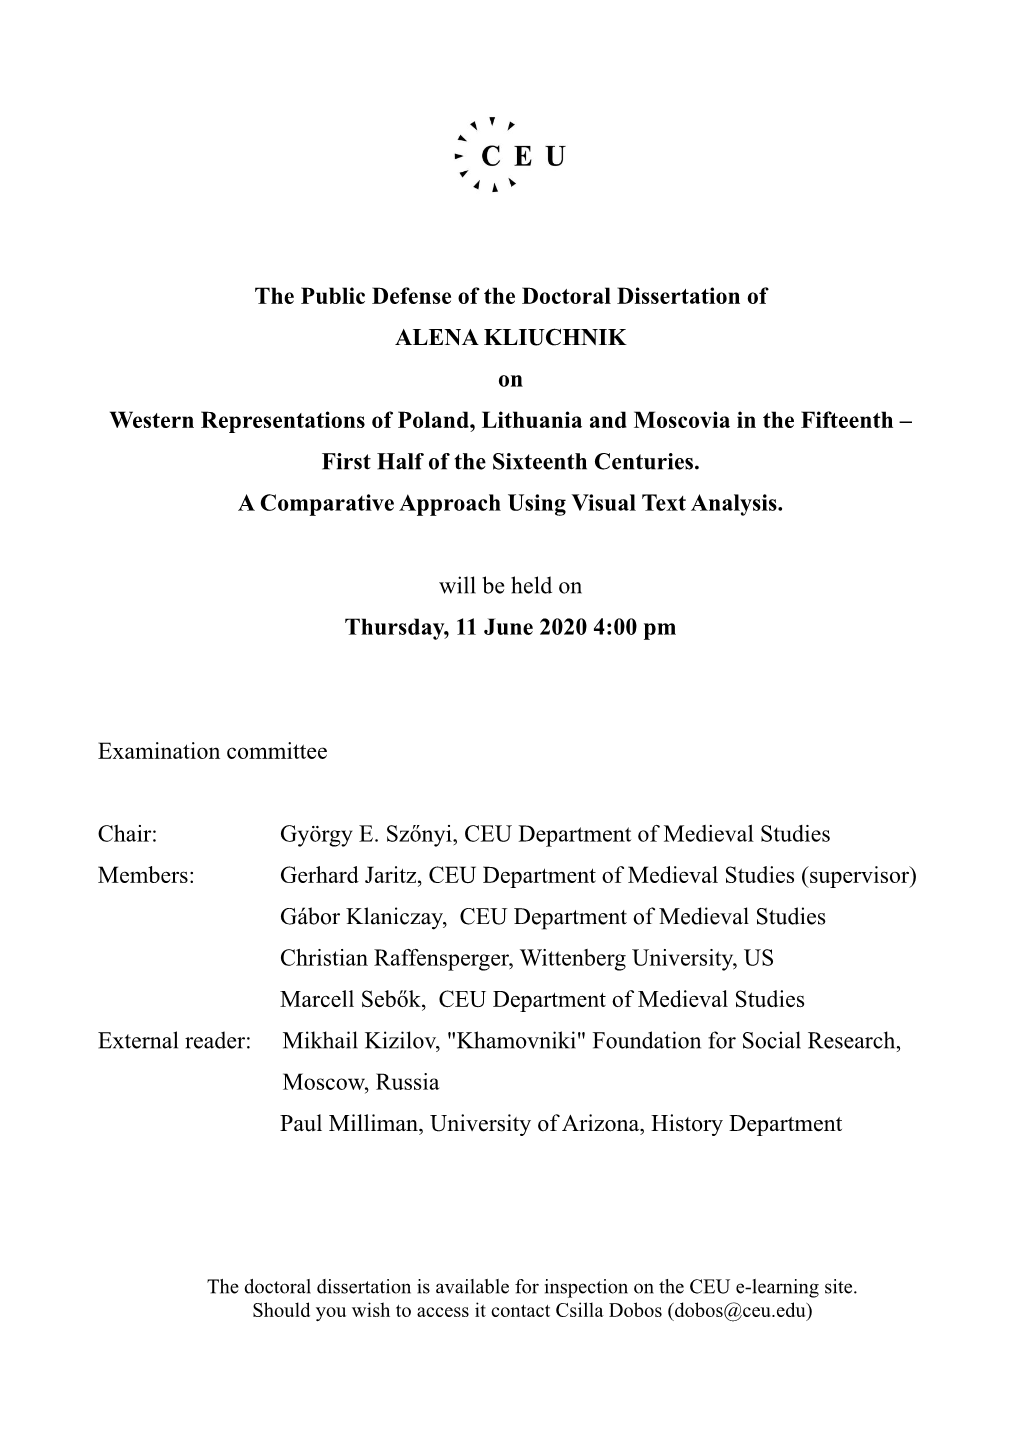 The Public Defense of the Doctoral Dissertation of ALENA KLIUCHNIK on Western Representations of Poland, Lithuania and Moscovia